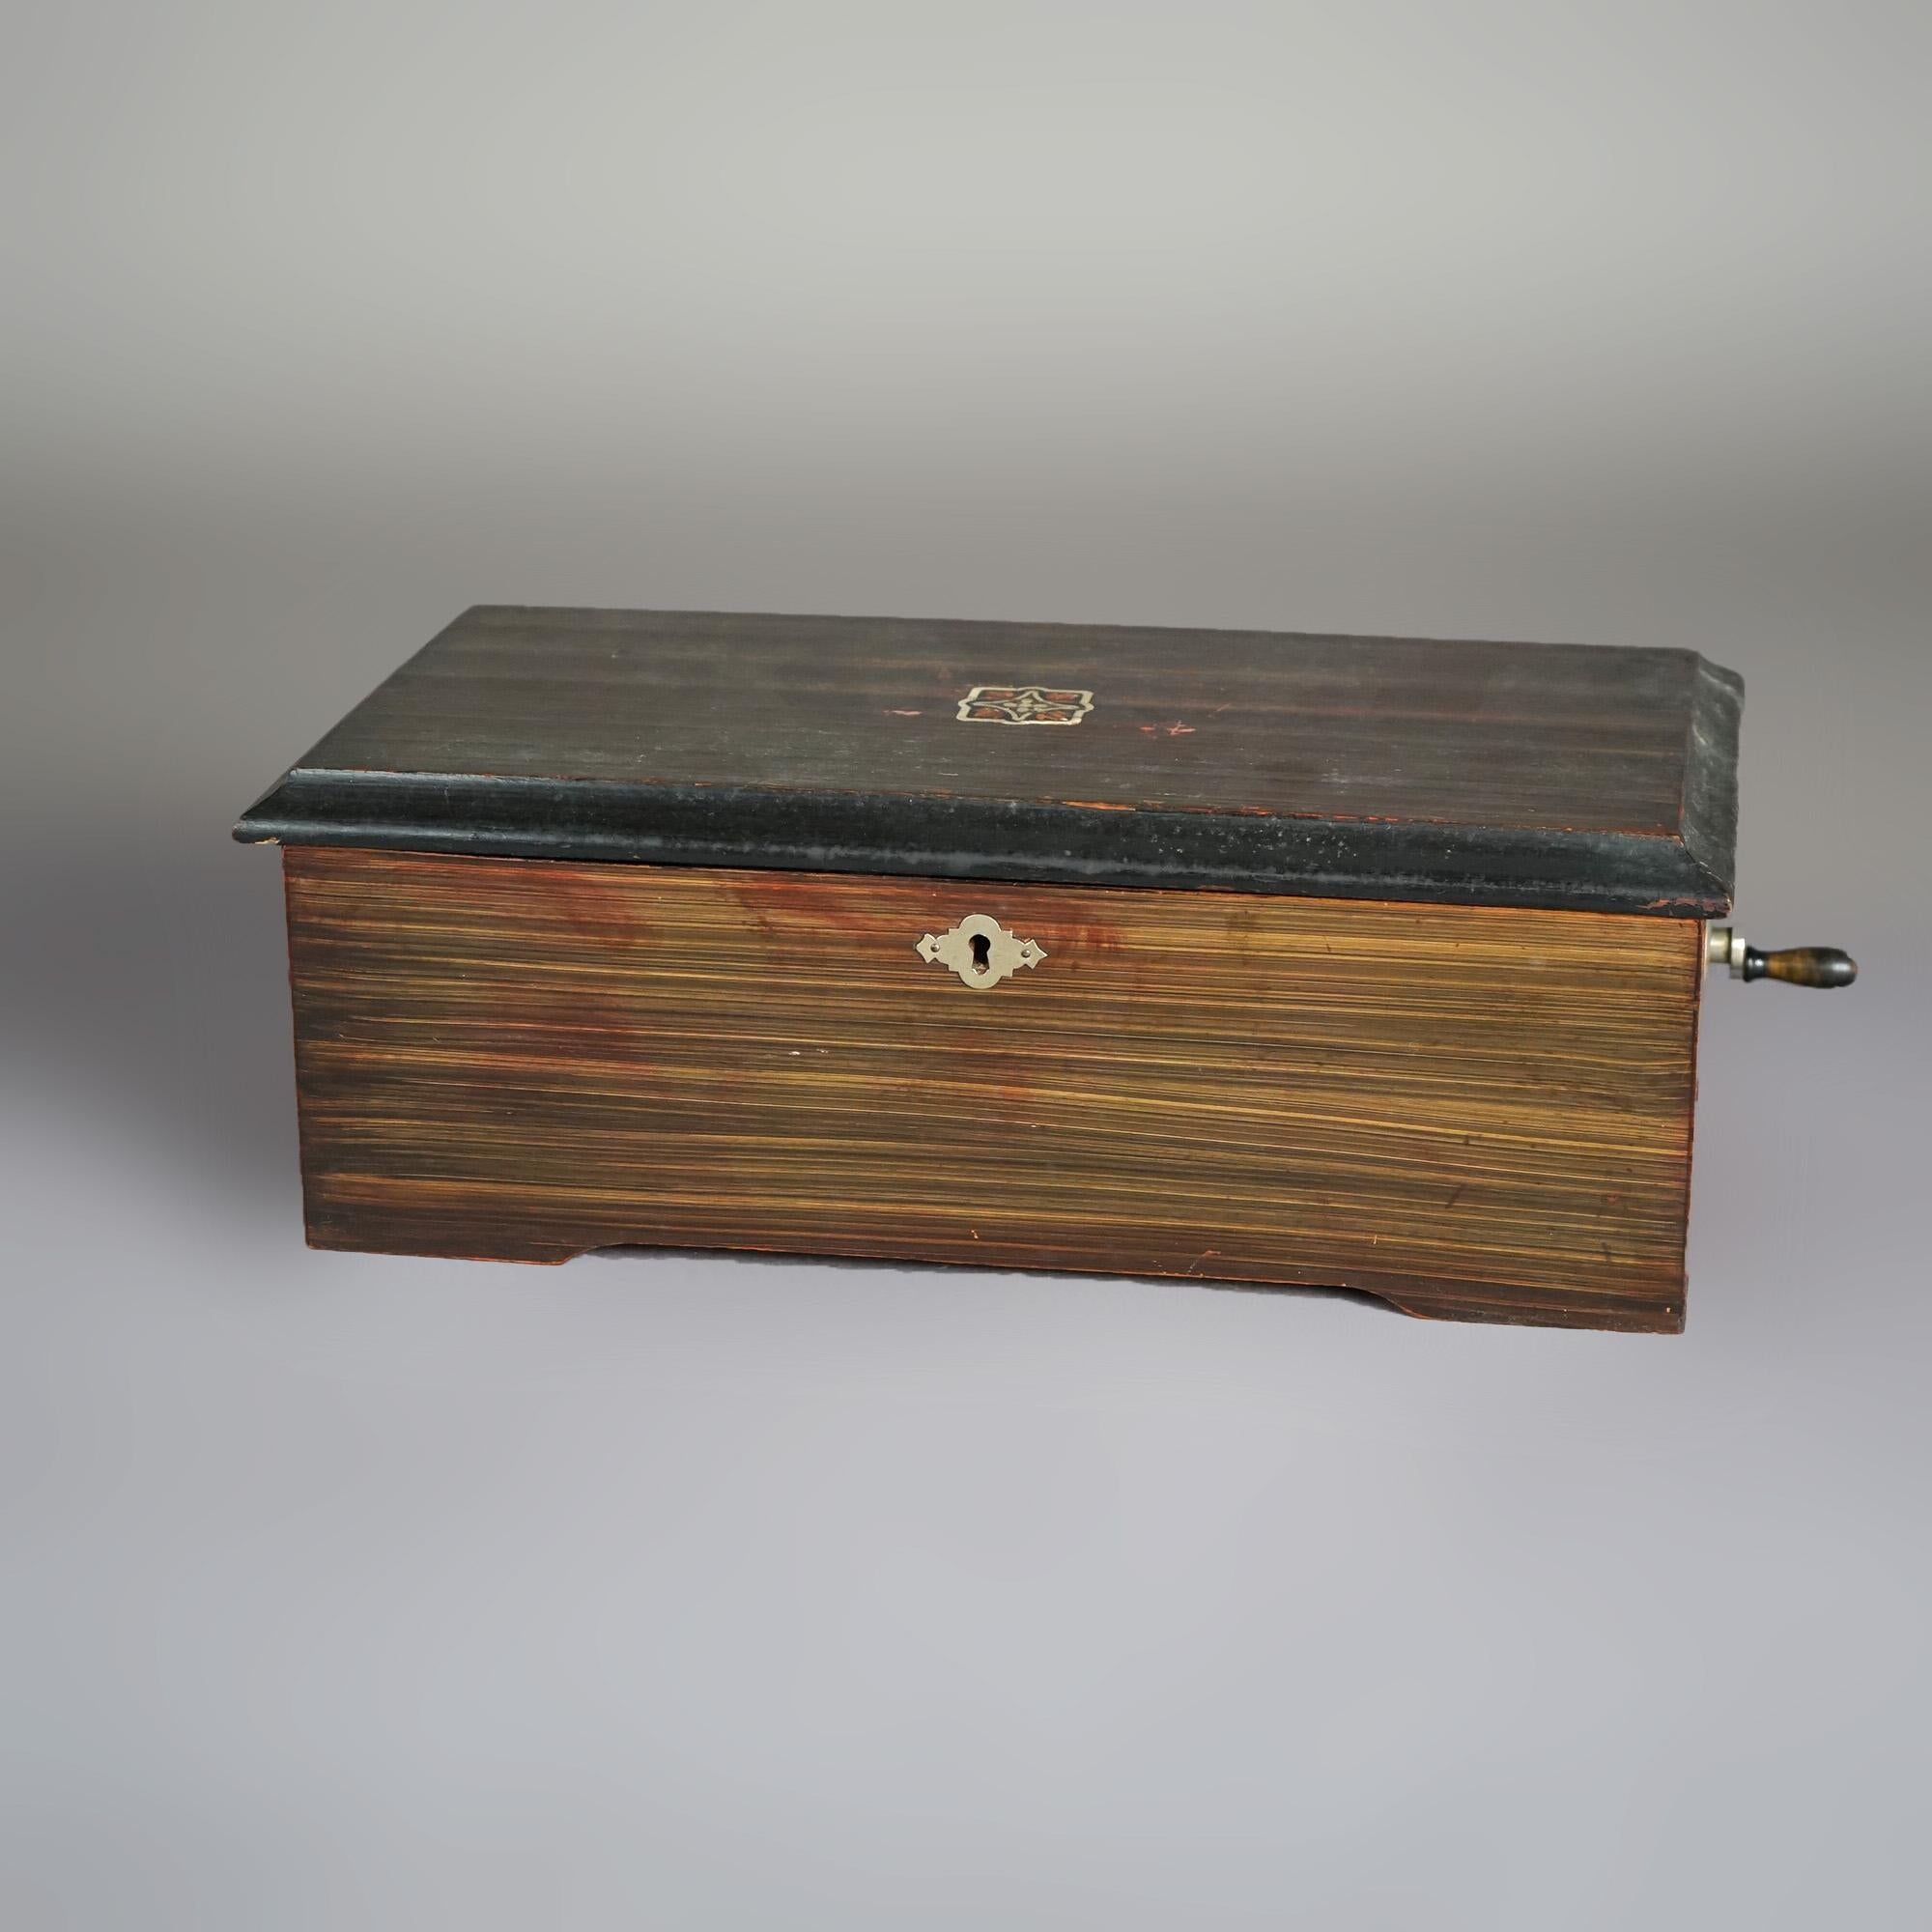 Antique Faux Grain Painted Swiss Six-Tune Music Box with Crank & Tune Card Circa 1890

Measures - 4.75